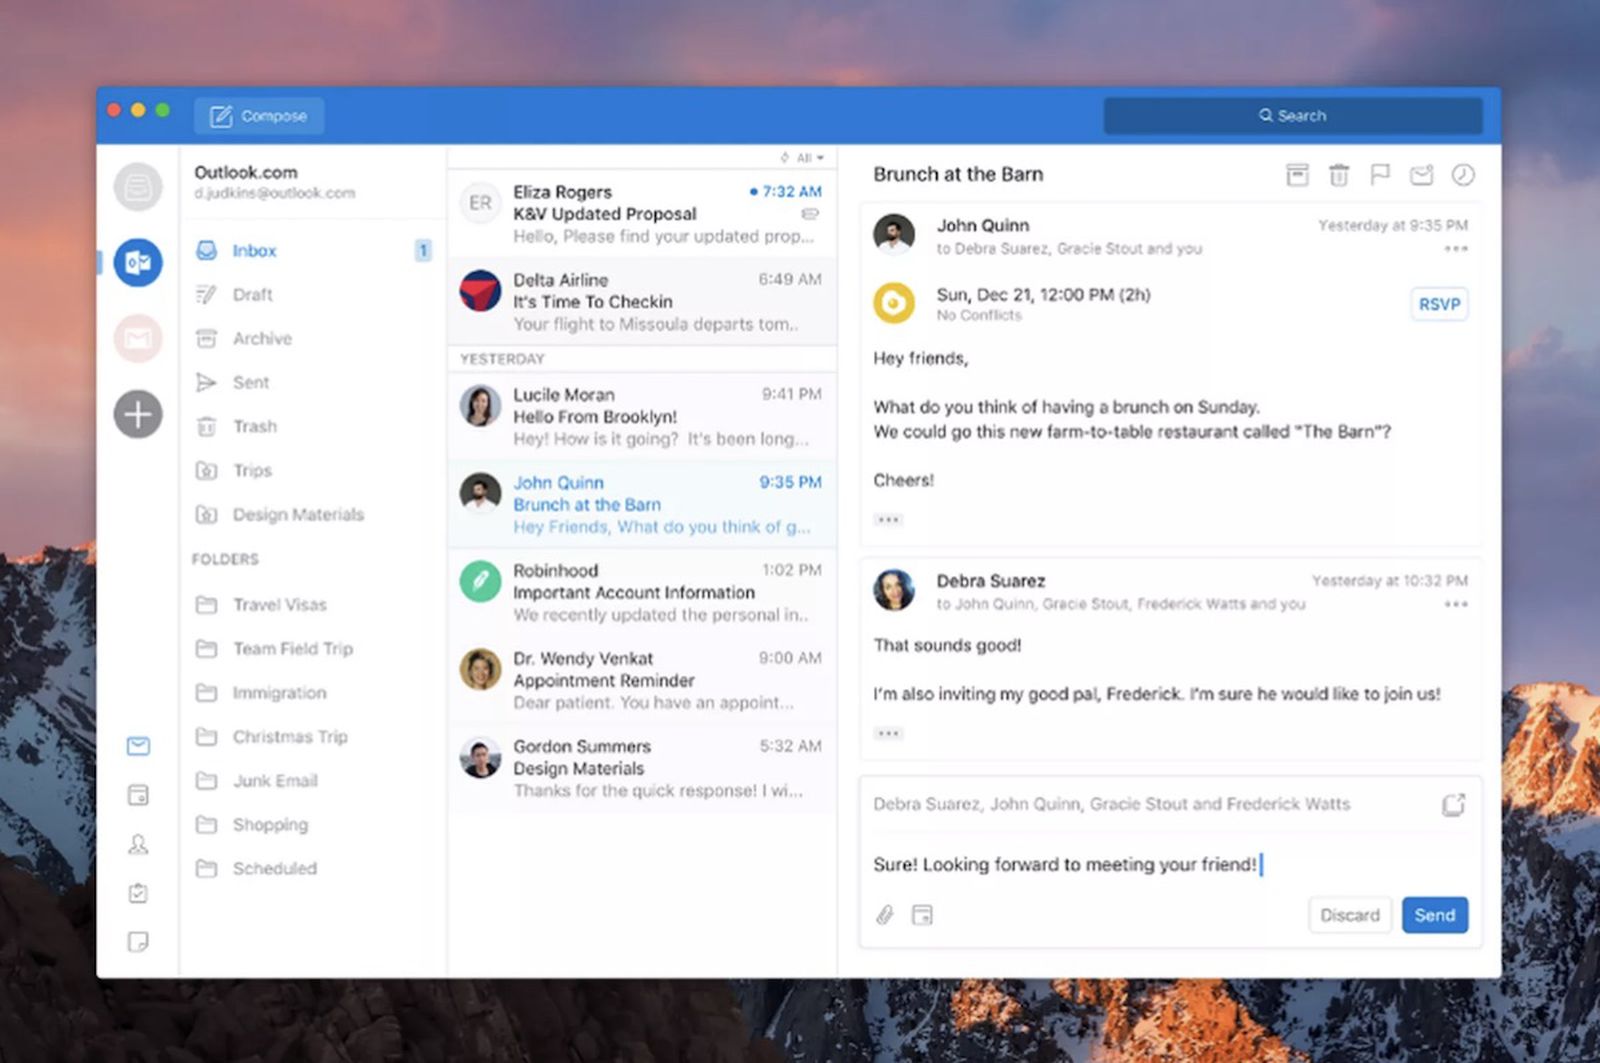 Microsoft Outlook for Mac Gaining 'Simplified' Redesign With UI Similar